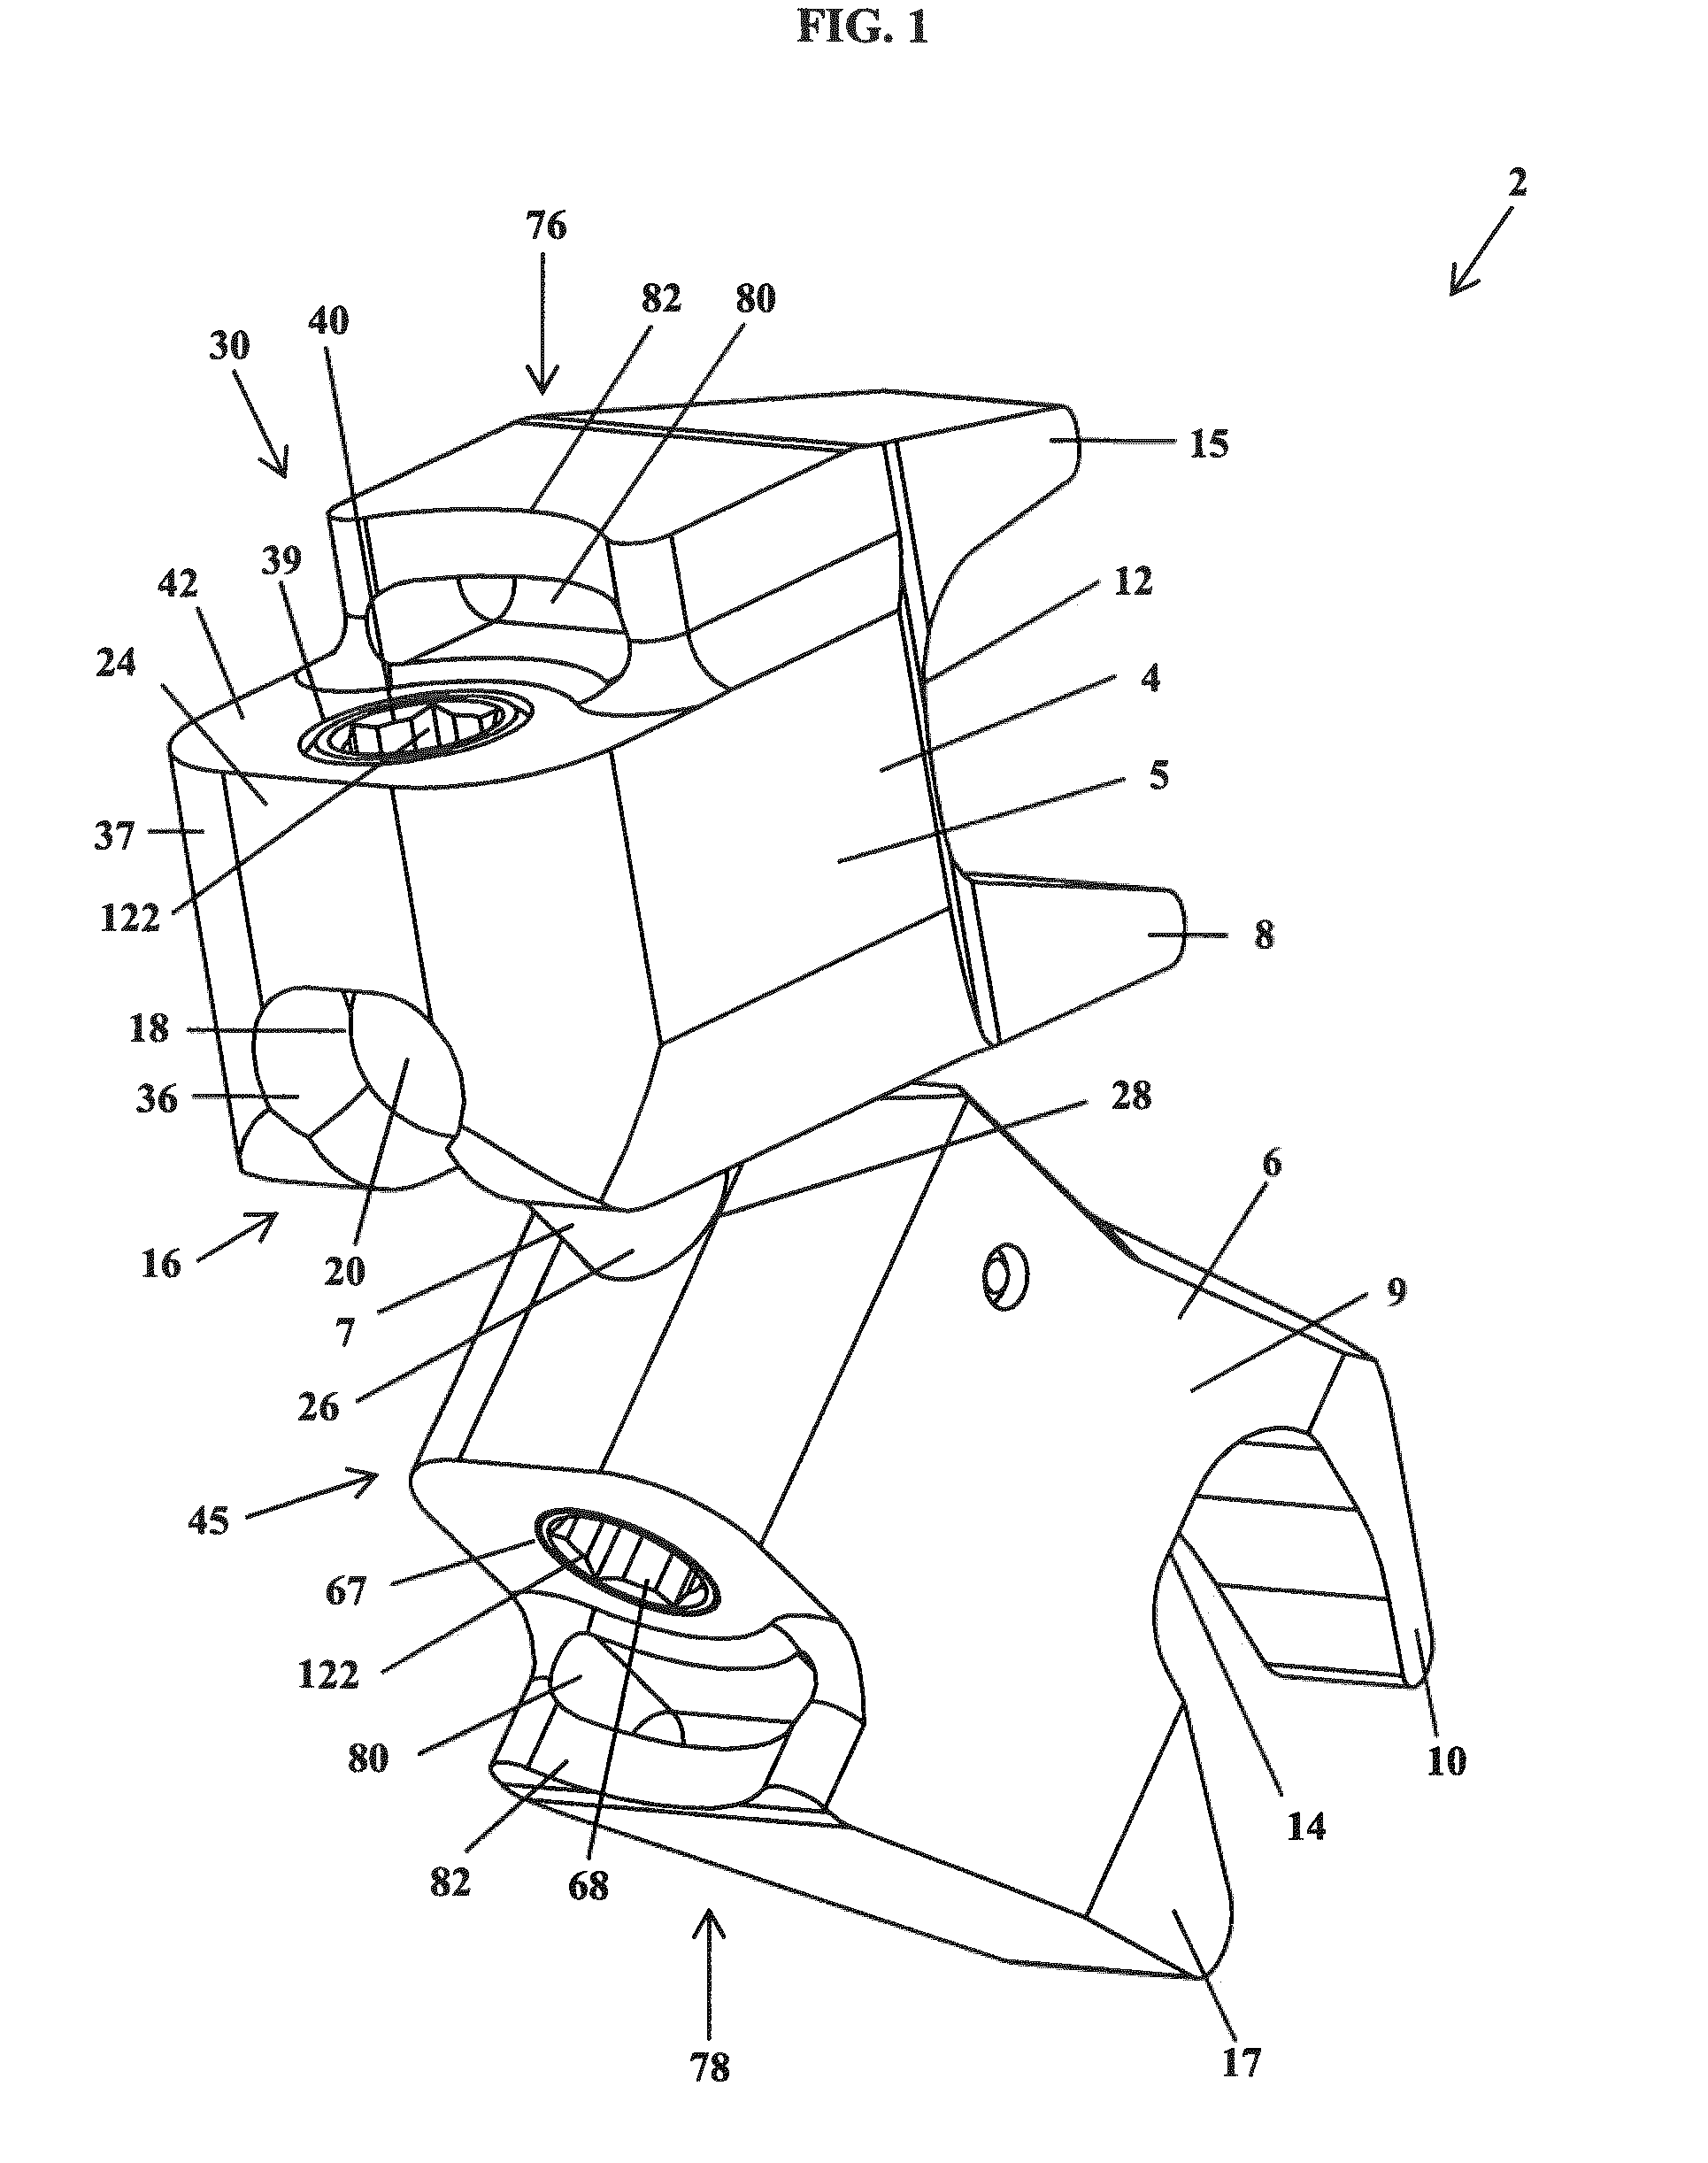 Intervertebral implant devices and methods for insertion thereof